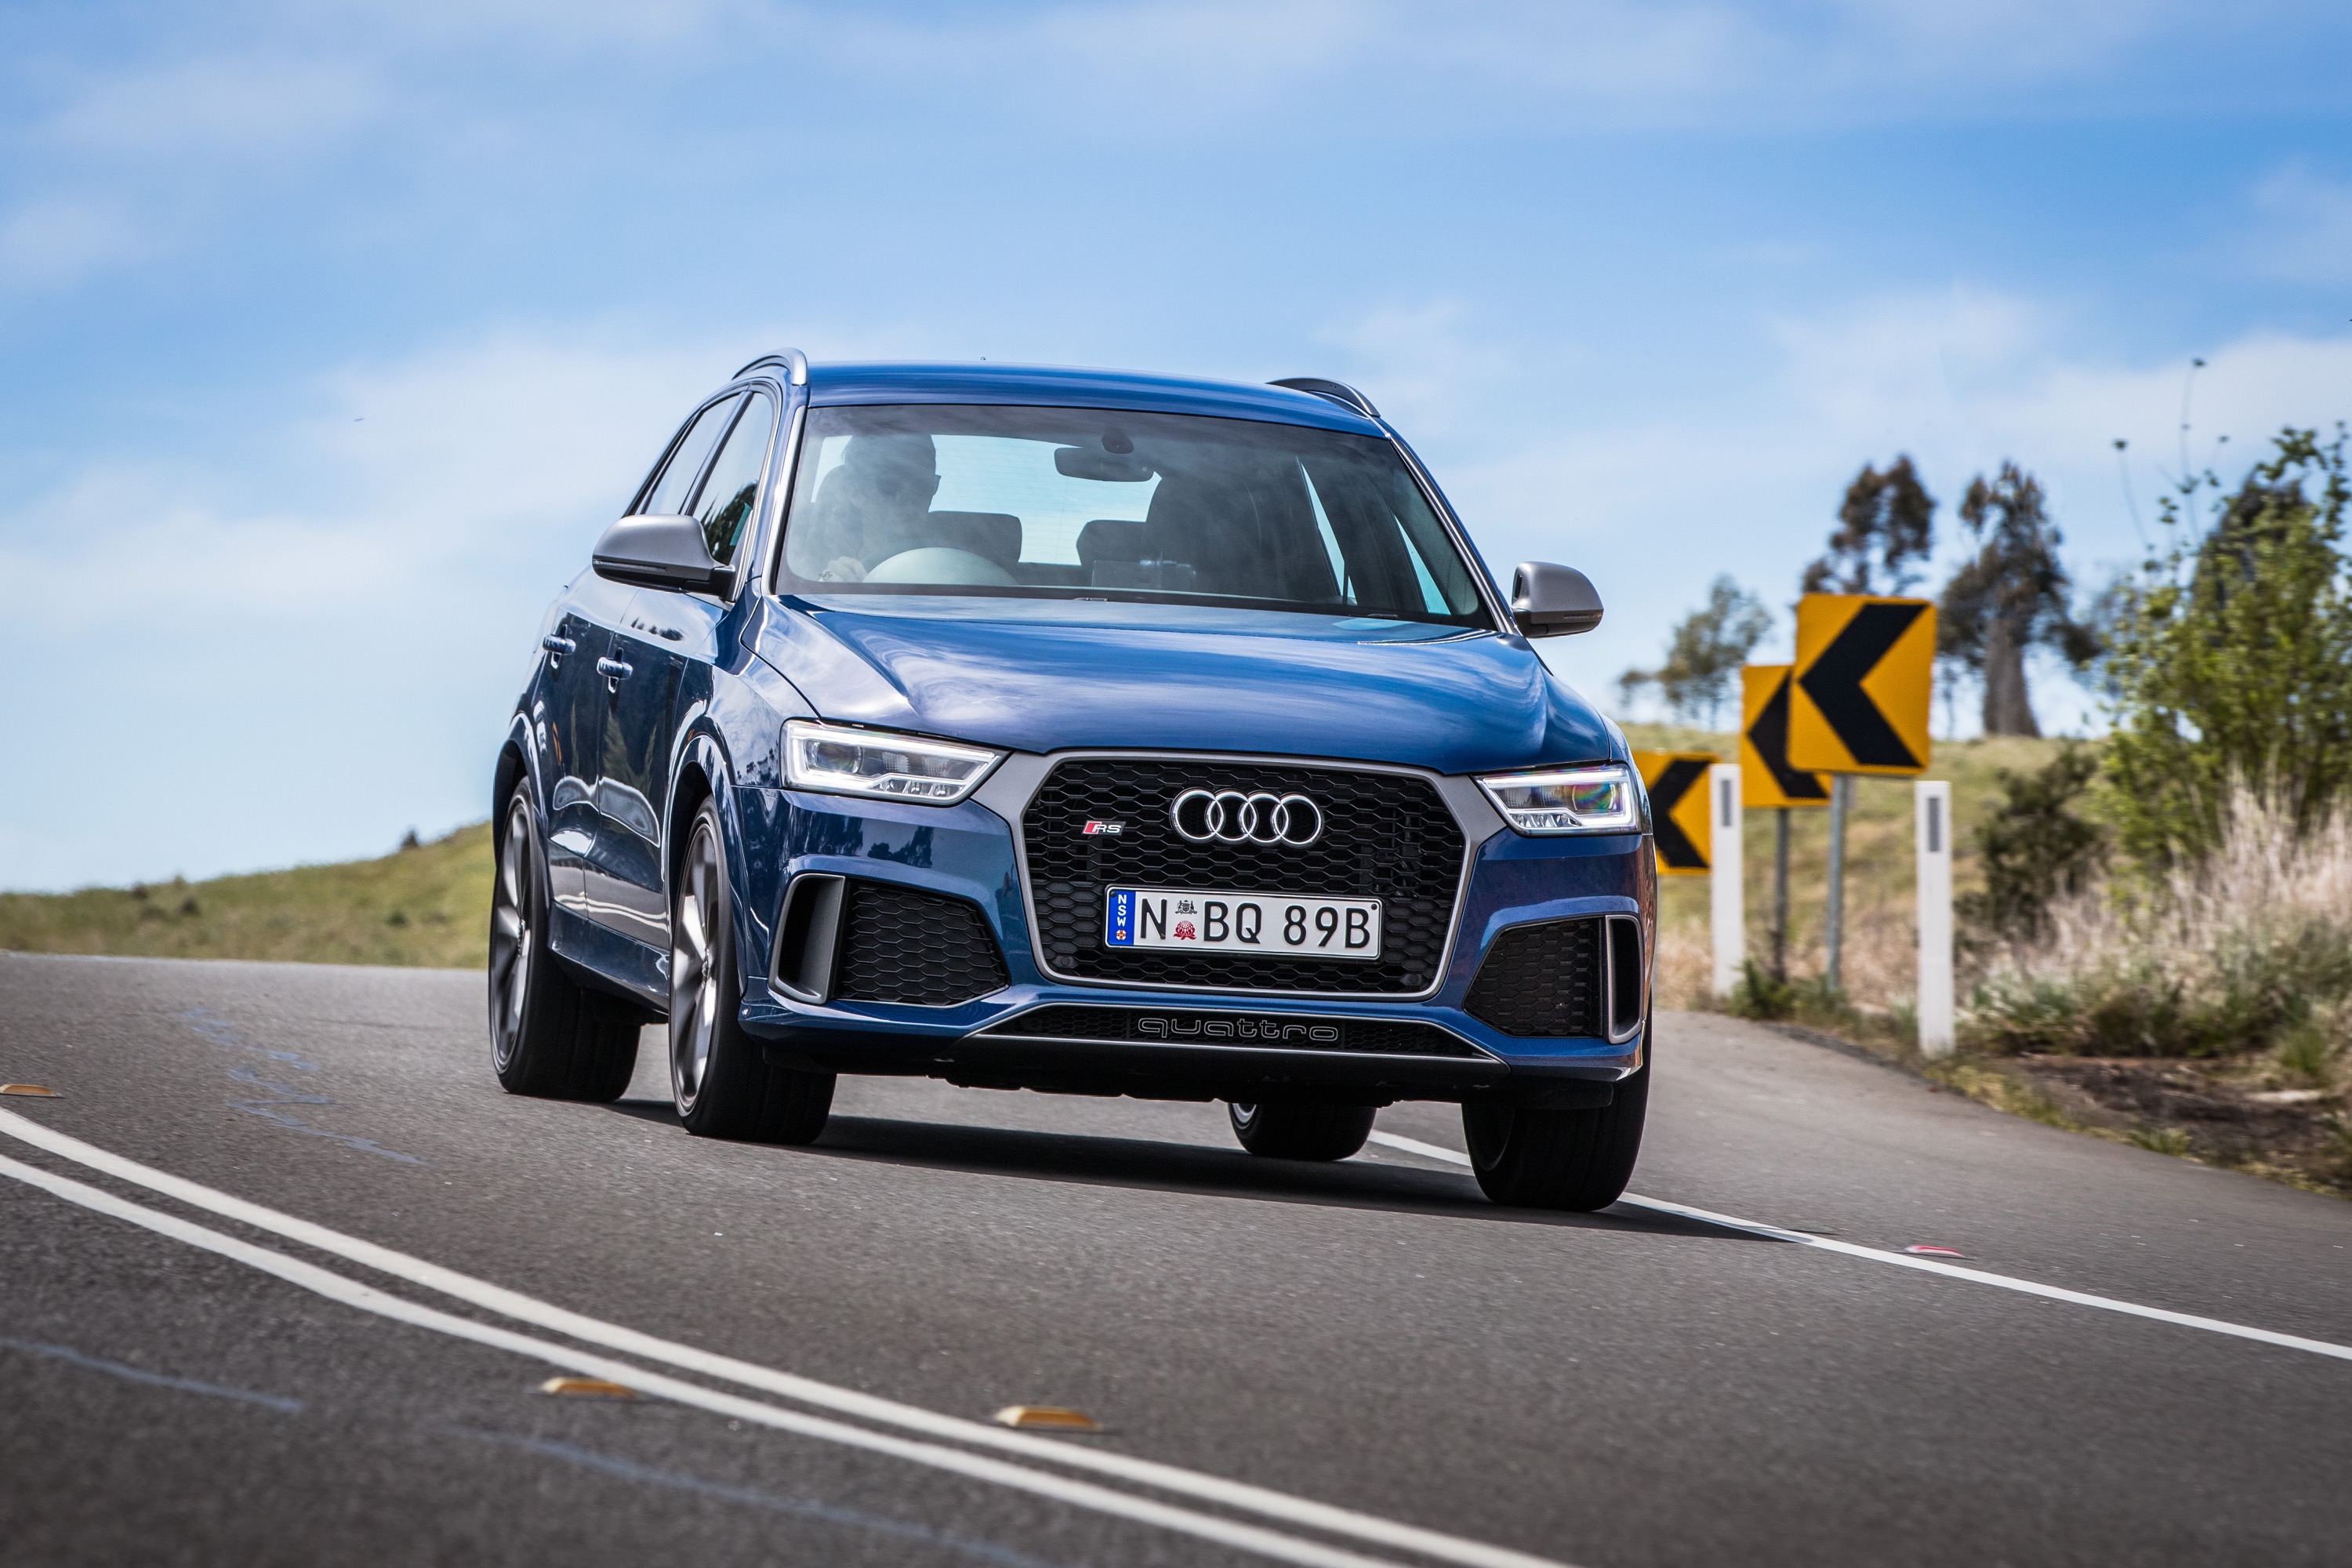 A Thrilling Ride: The 2017 Audi RS Q3 Performance